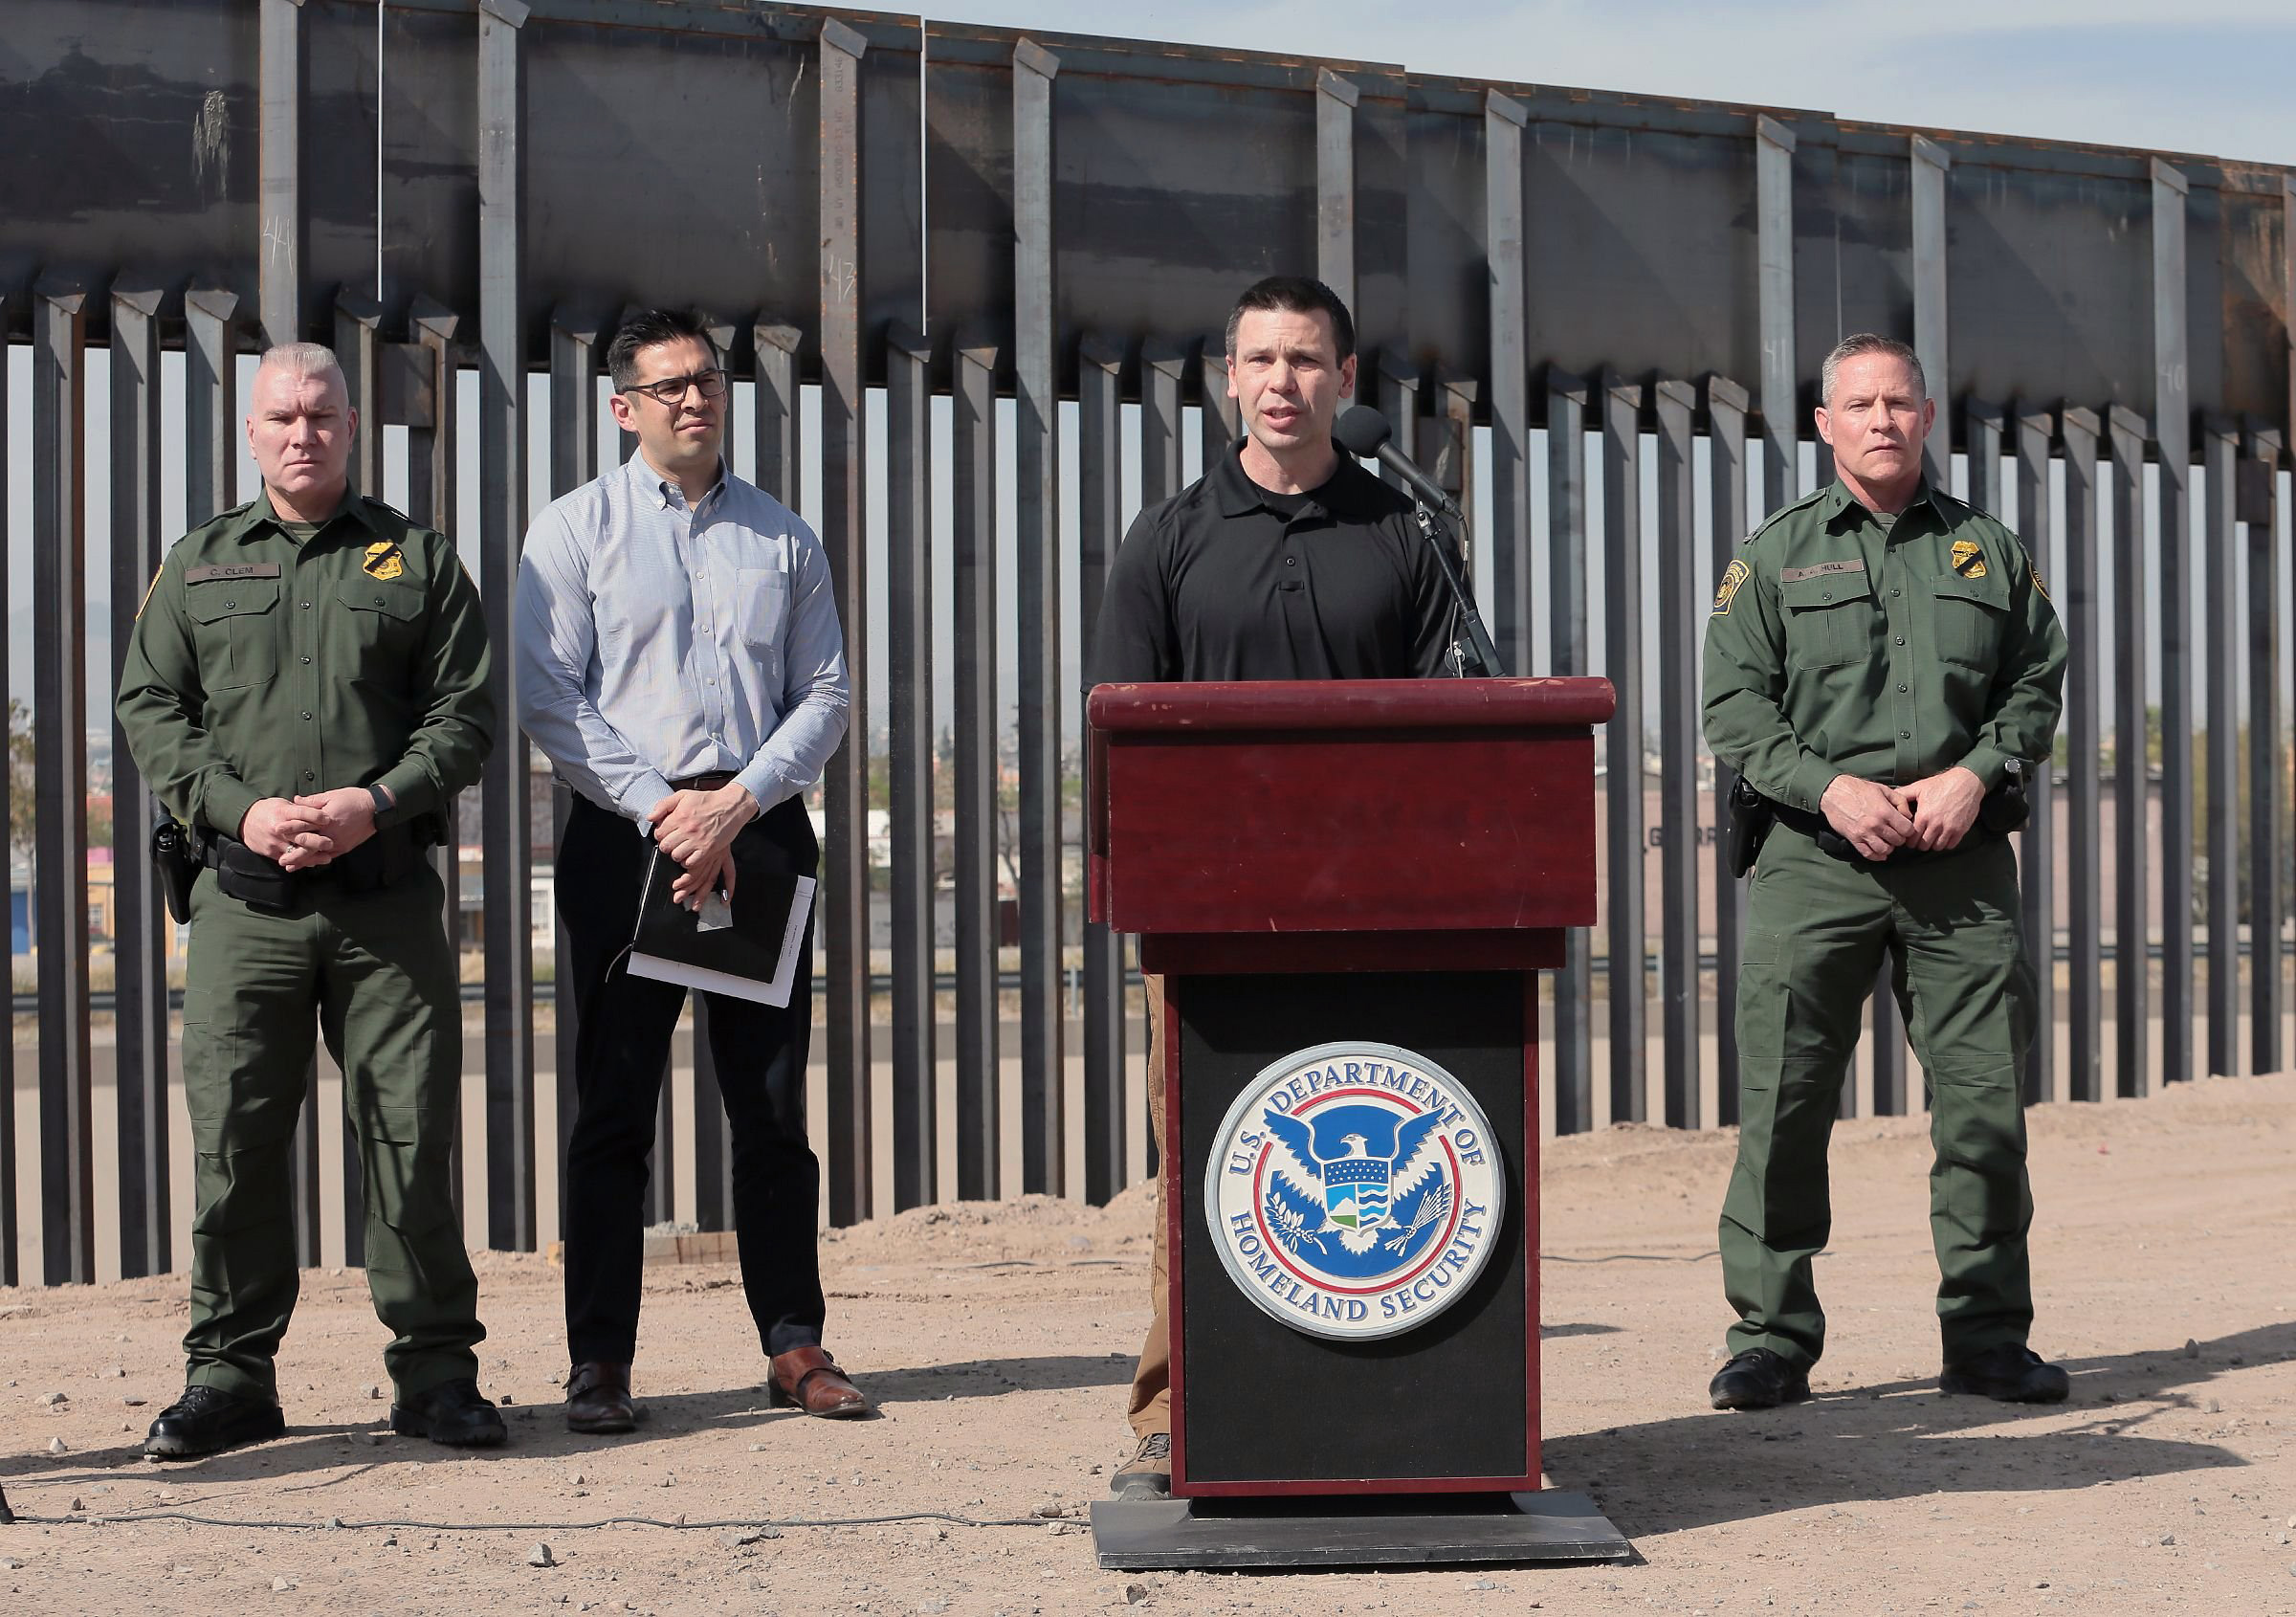 U.S. Customs and Border Protection Commissioner Kevin K. McAleenan, with the bollard border fence in the background, held a press conference in El Paso, Texas, on Mar. 27, 2019. McAleenan said the border has hit its 